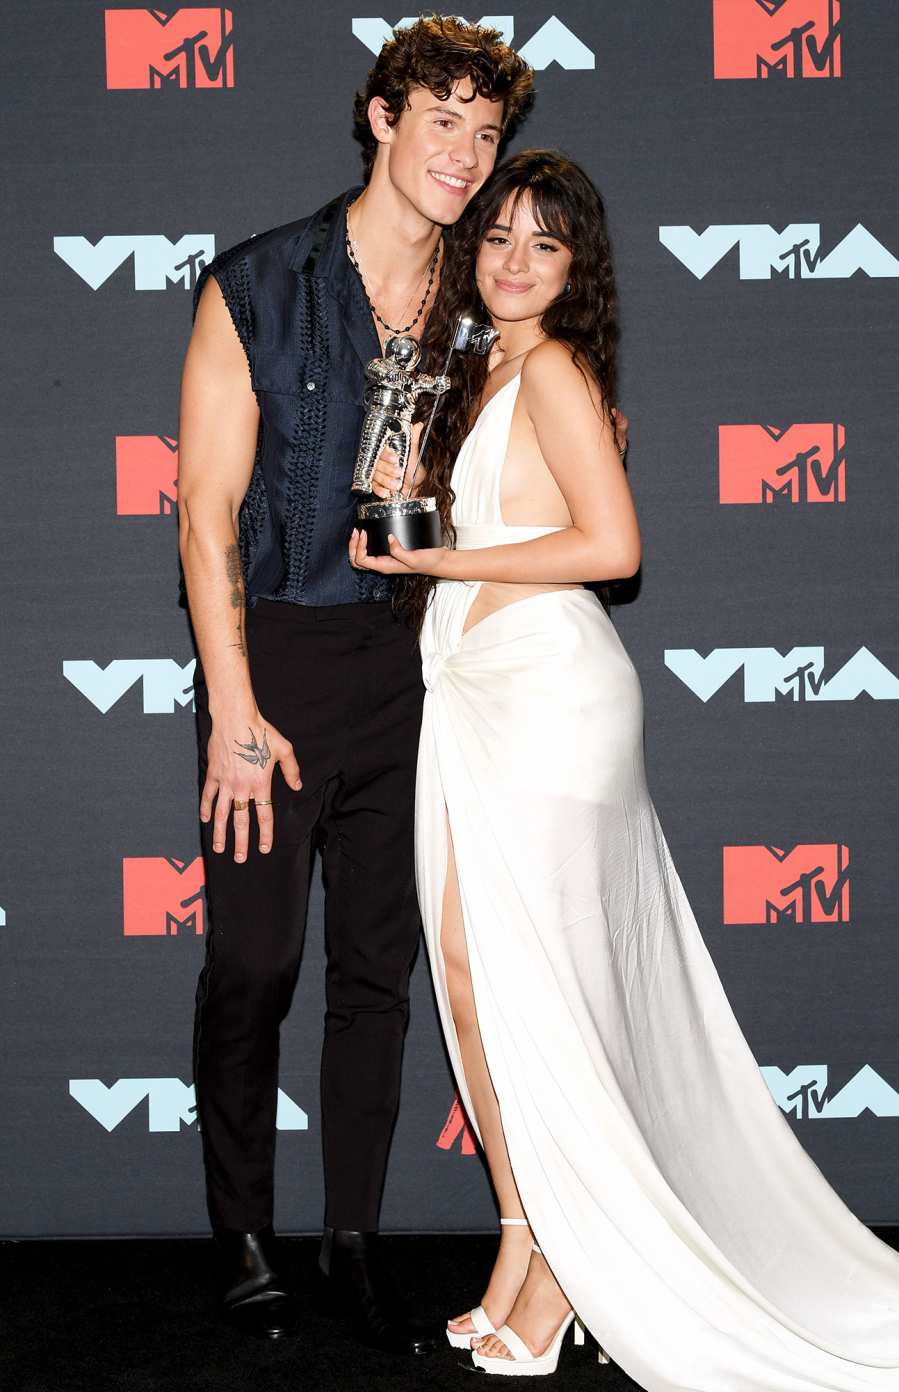 Shawn Mendes and Camila Cabello Hottest Couples at the VMAs 2019